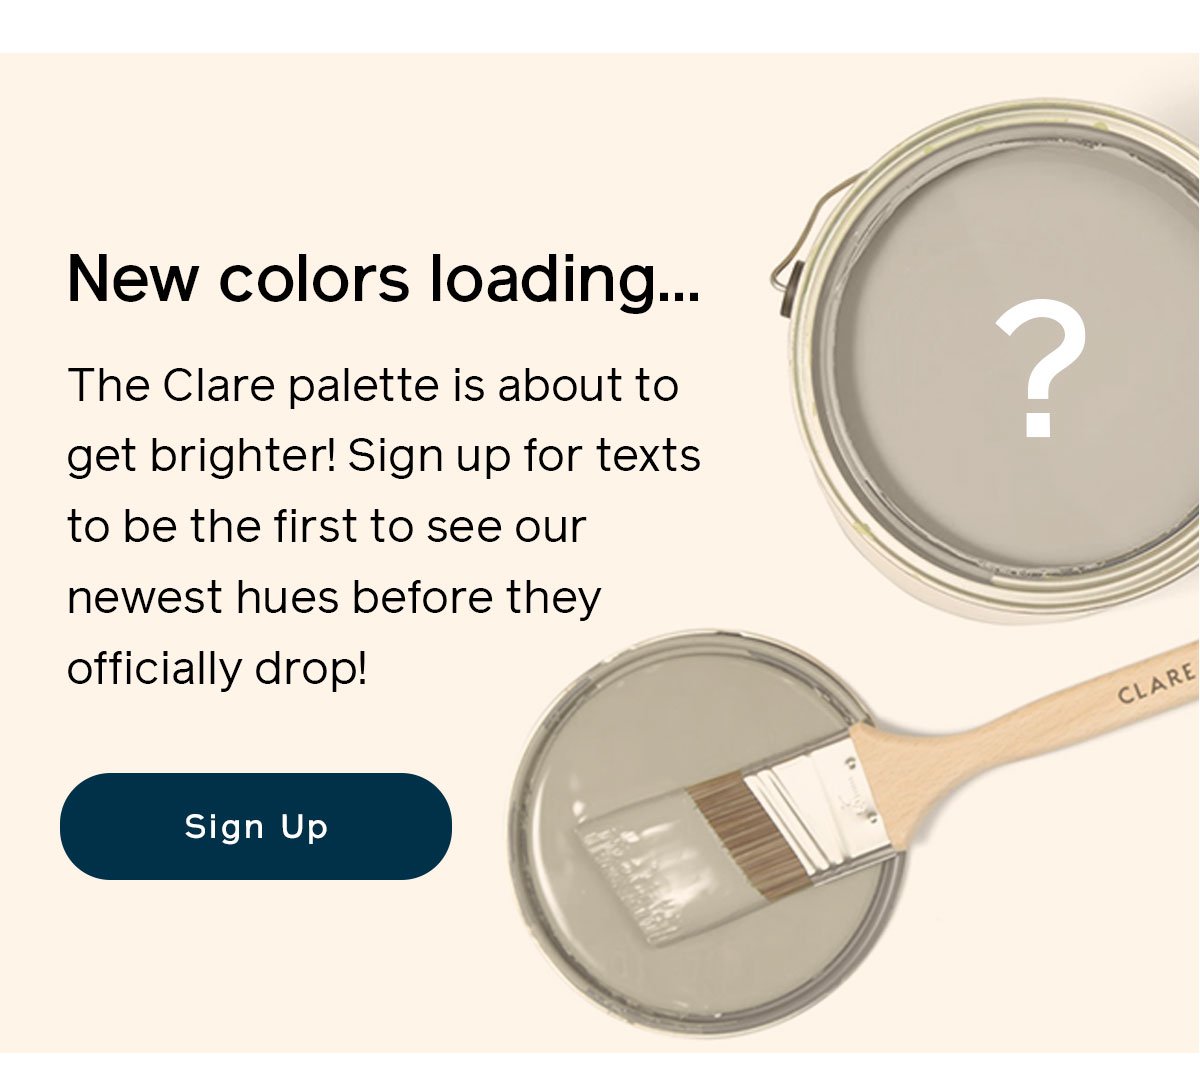 Want a sneak peek at our newest colors? Sign up for texts! *By subscribing, you agree to receive recurring automated marketing text messages (e.g. cart reminders) at the phone number provided. Consent is not a condition to purchase. Msg & data rates may apply. Msg frequency varies. Reply HELP for help and STOP to cancel. 